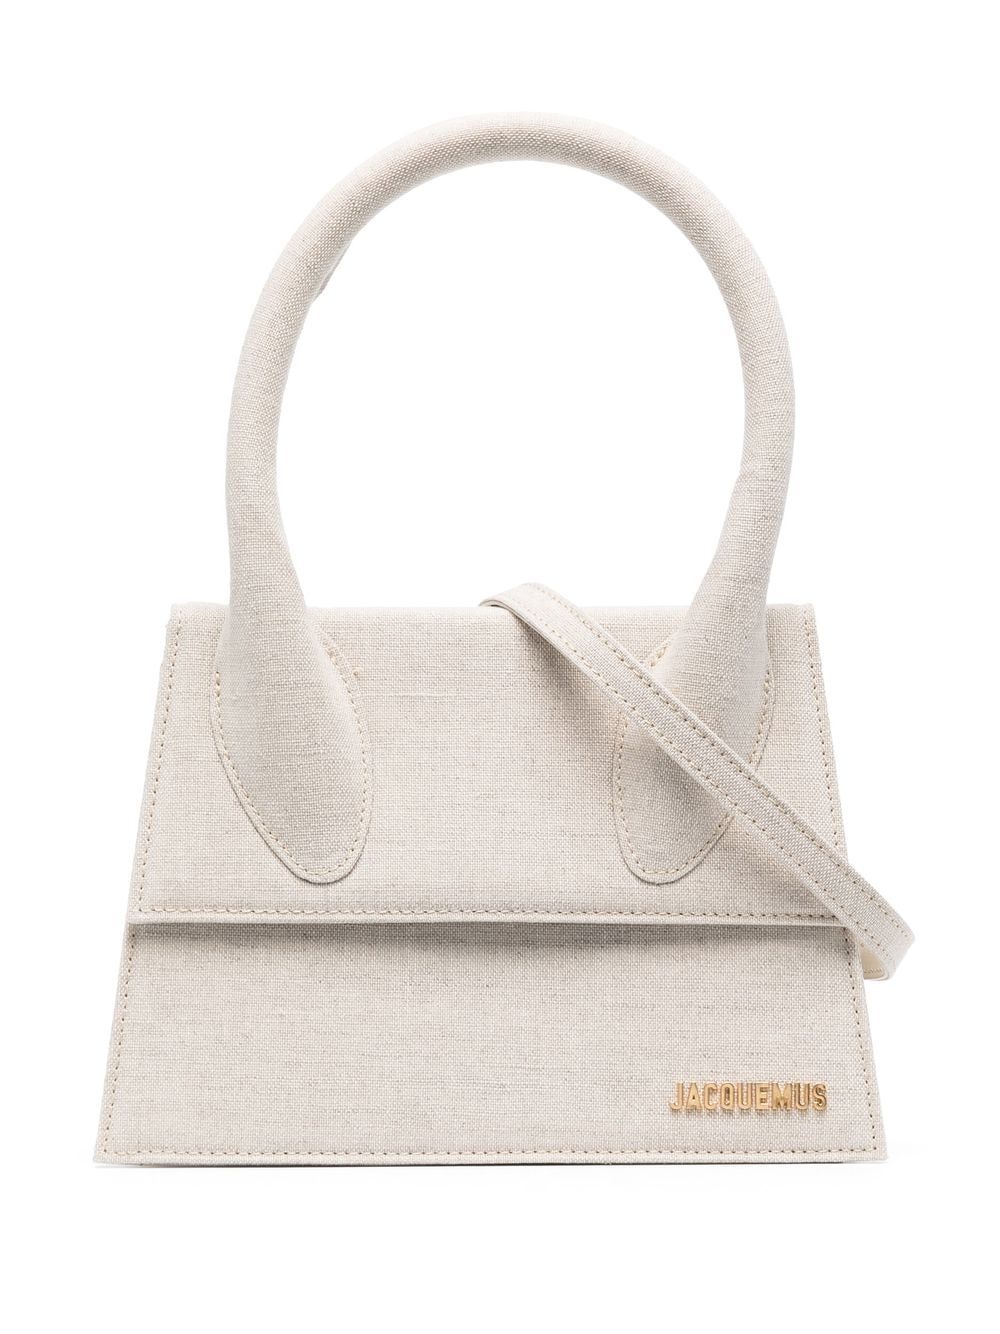 Shop Jacquemus The Grand Chiquito: A Chic And Functional Top-handle Handbag For Women In Gray